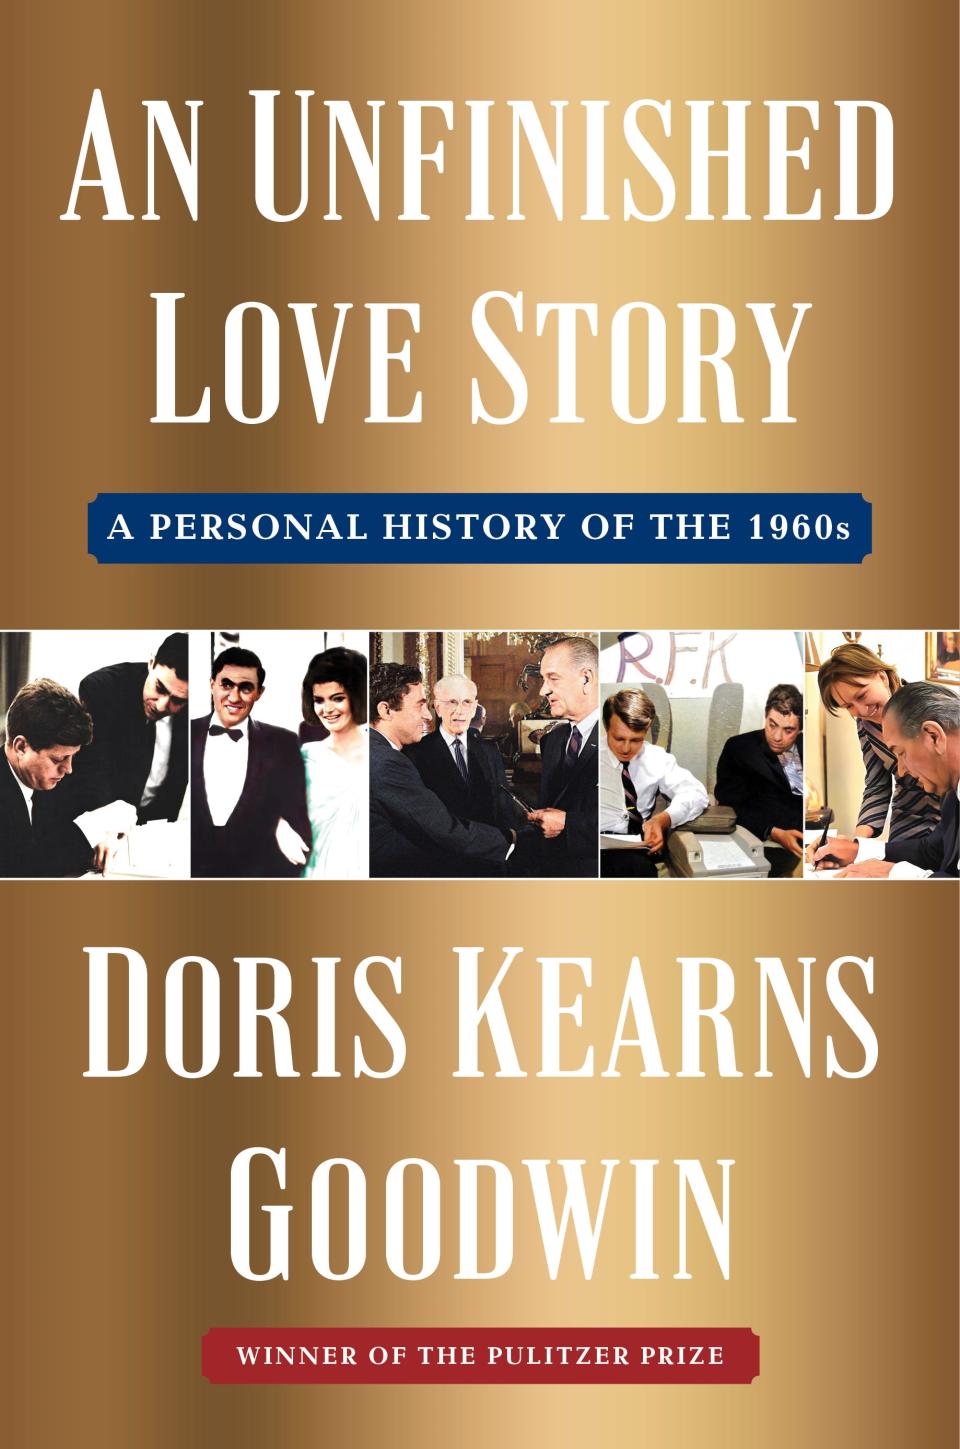 “An Unfinished Love Story: A Personal History of the 1960s” (Simon & Schuster, 469 pages, $35) by Doris Kearns Goodwin.